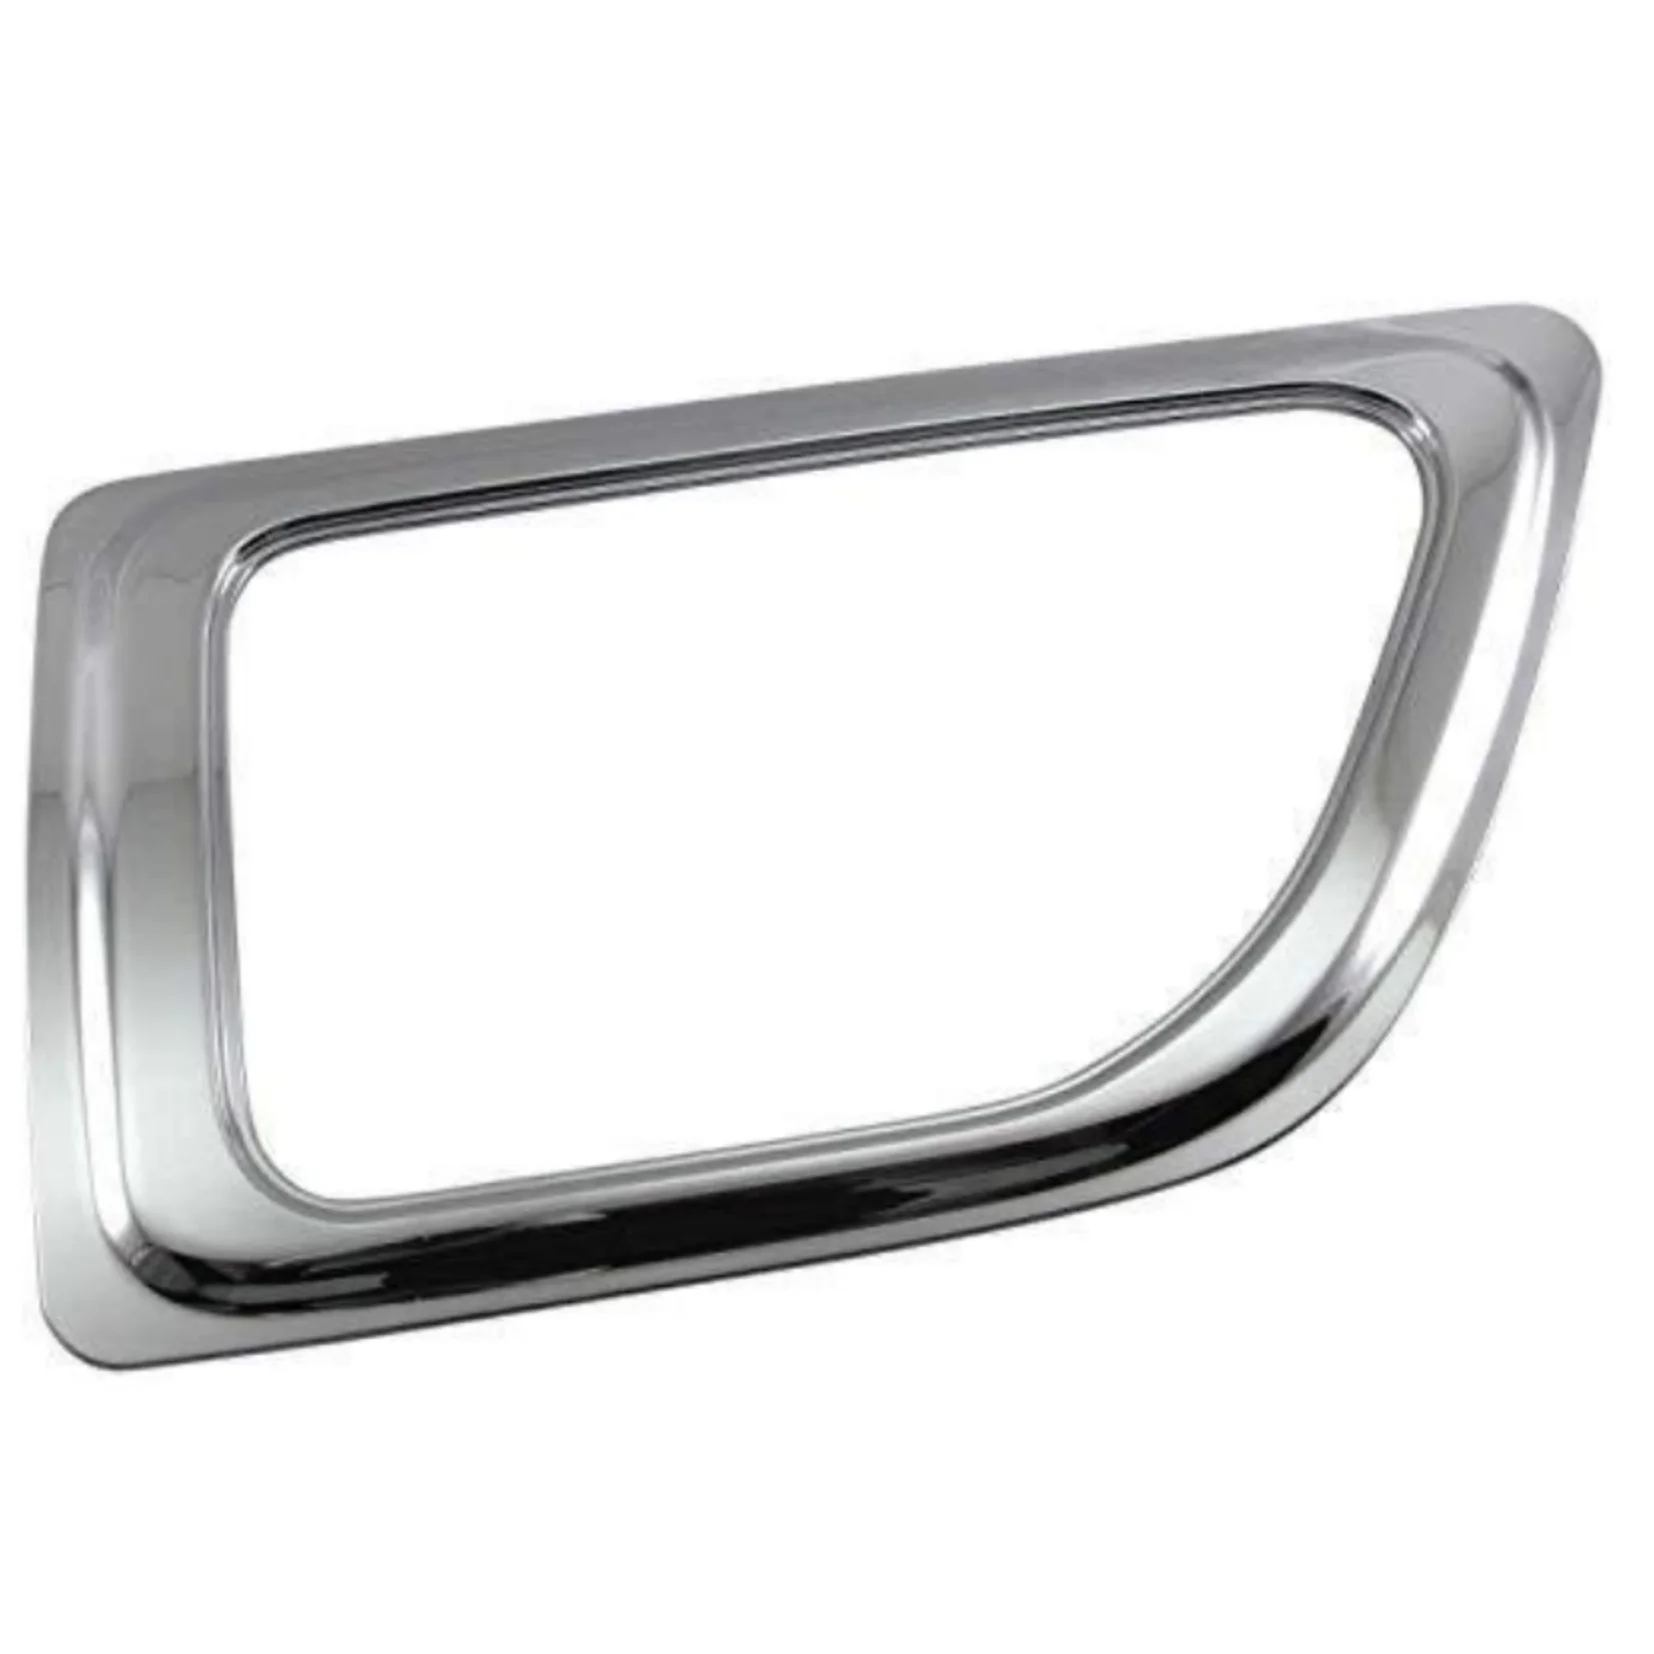 

HIGH QUALITY ELECTROPLATING CHROME DOOR SAFETY WINDOW TRIM FOR HINO 700 PROFIA HINO 500 RANGER TRUCK